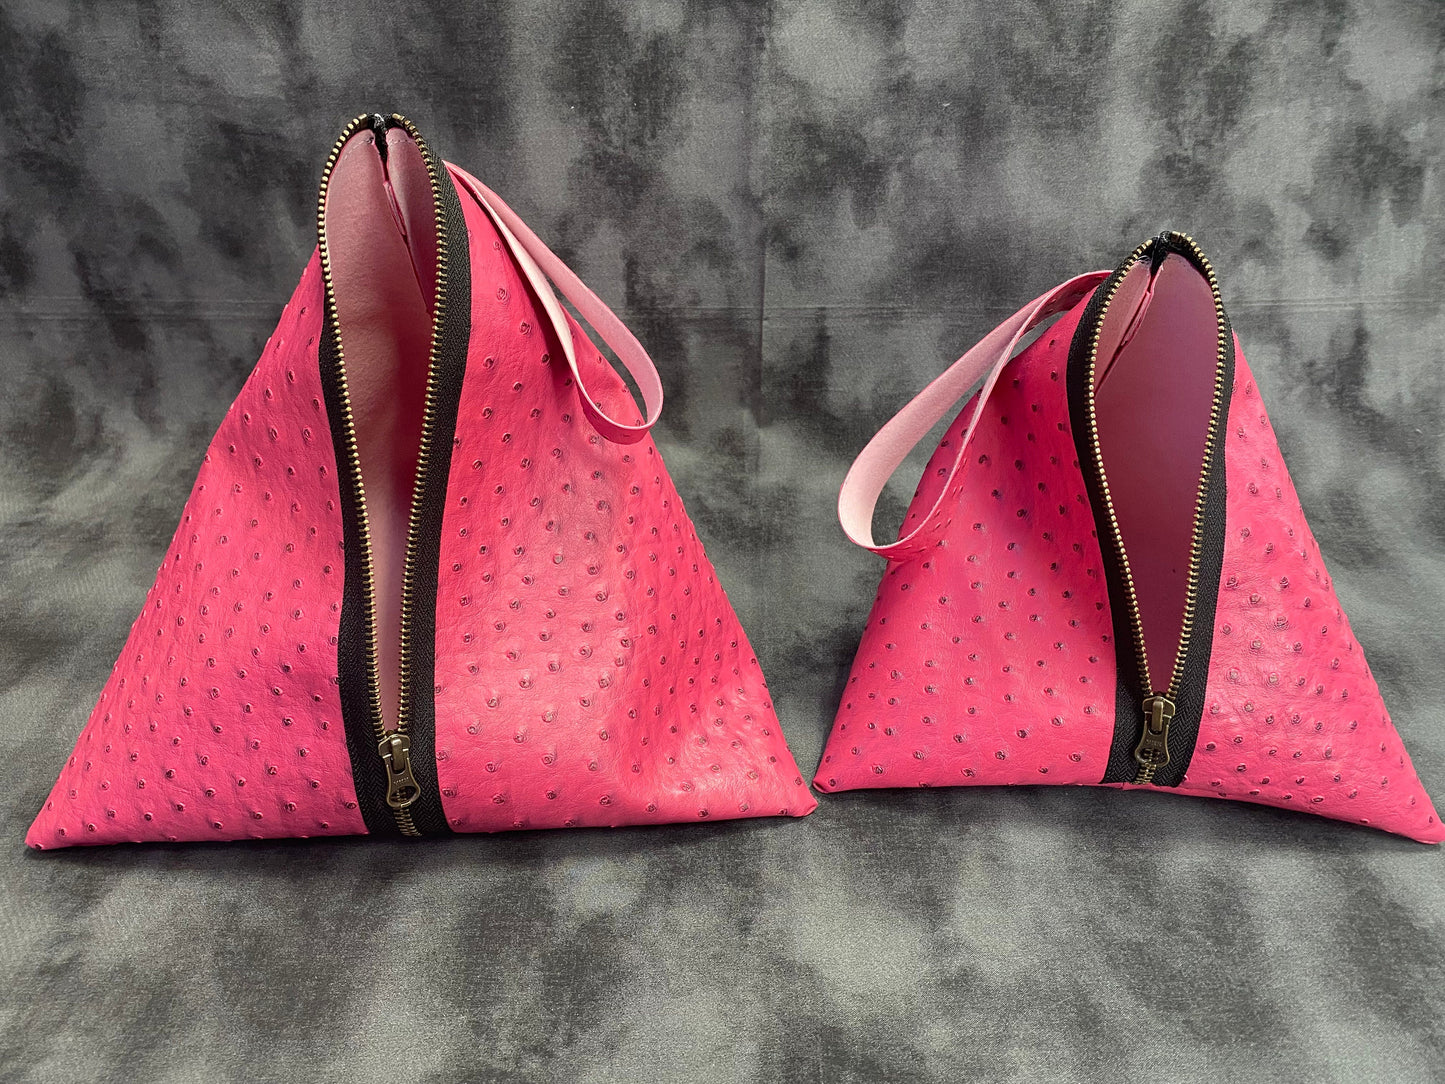 Triangle Pouch - Pink Ostrich (Two Sizes)